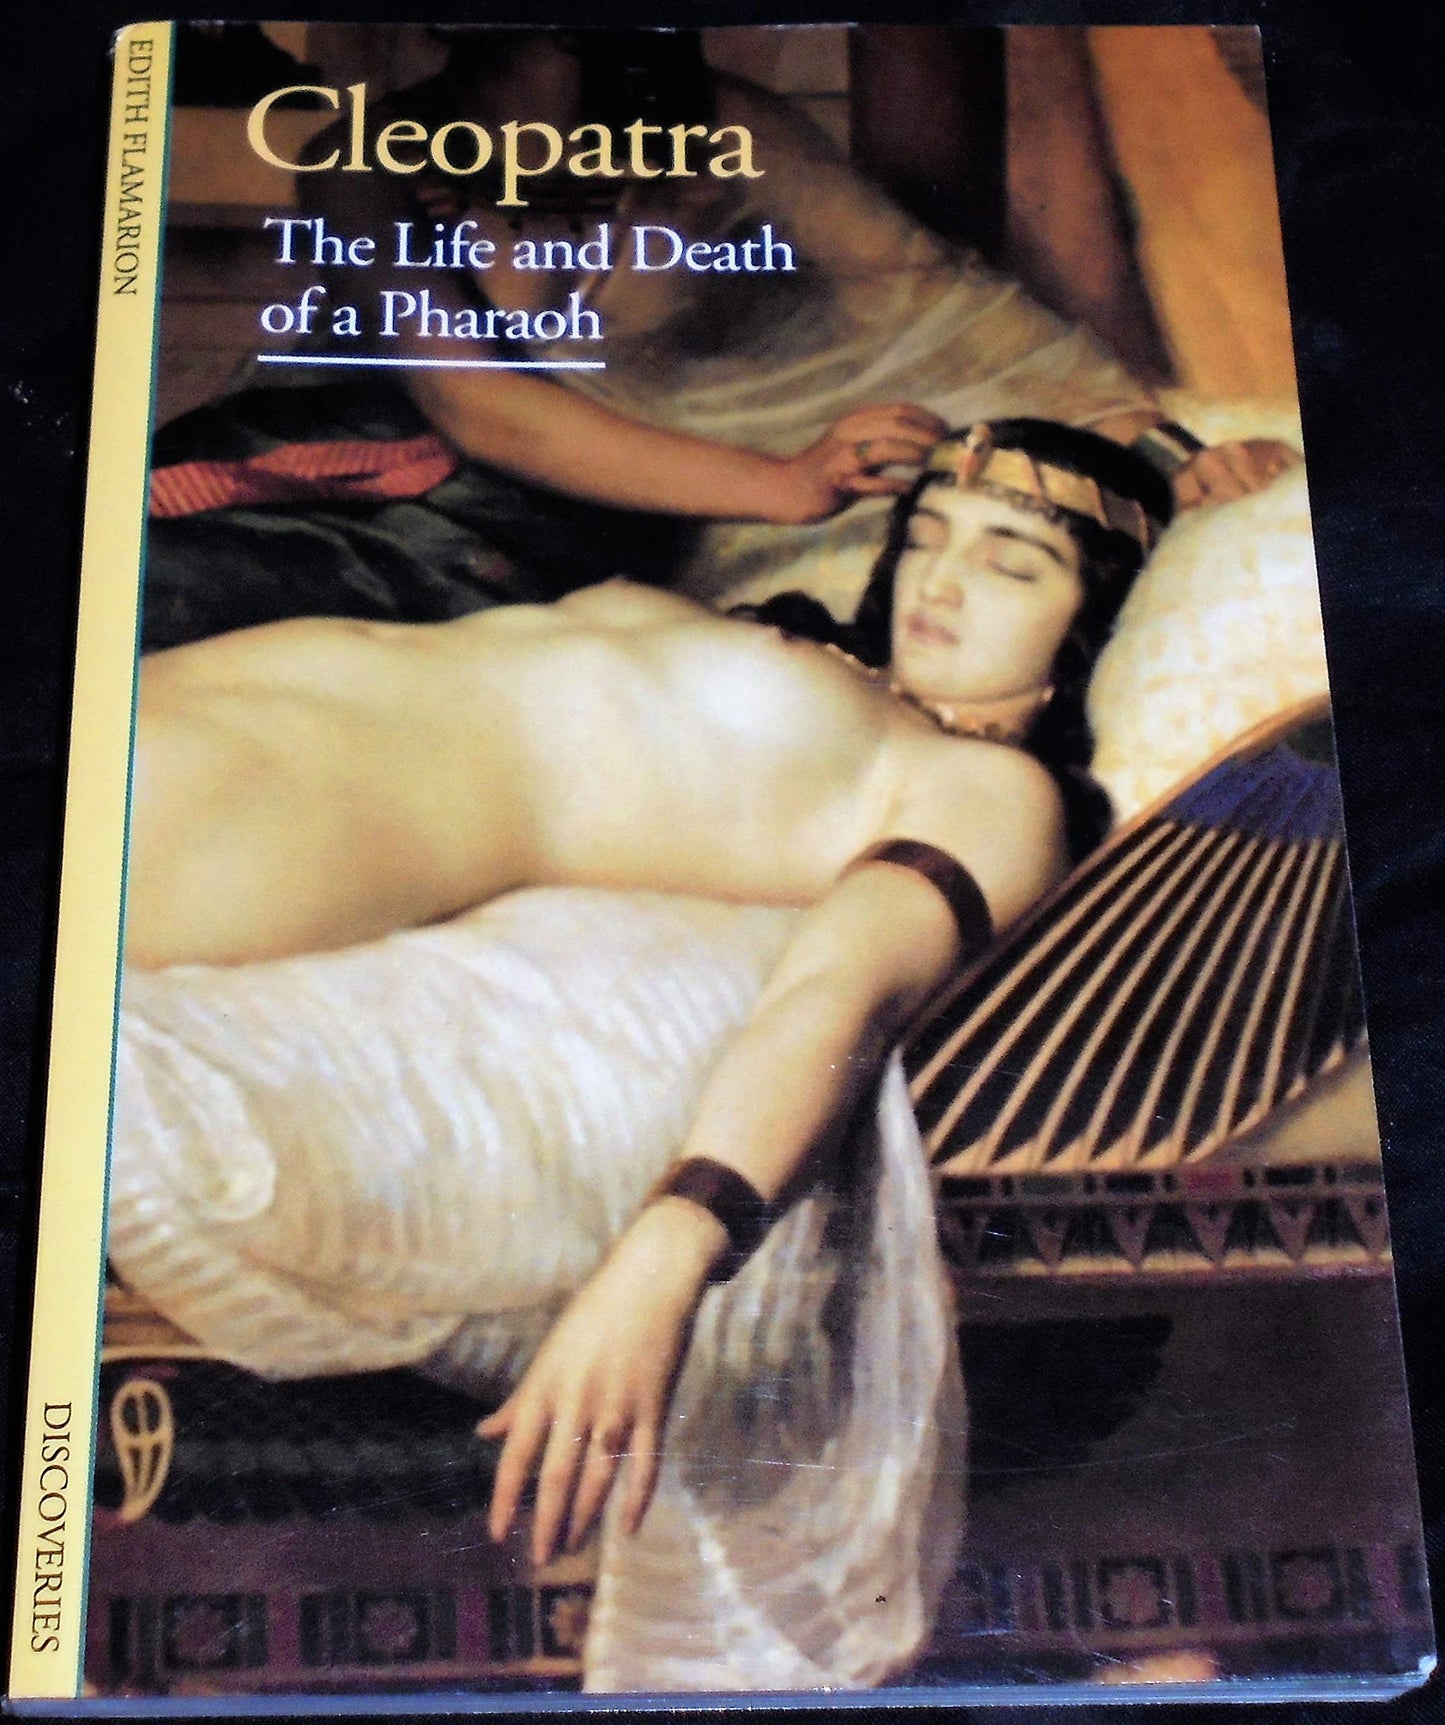 Cleopatra (The Life and Death of a Pharaoh)